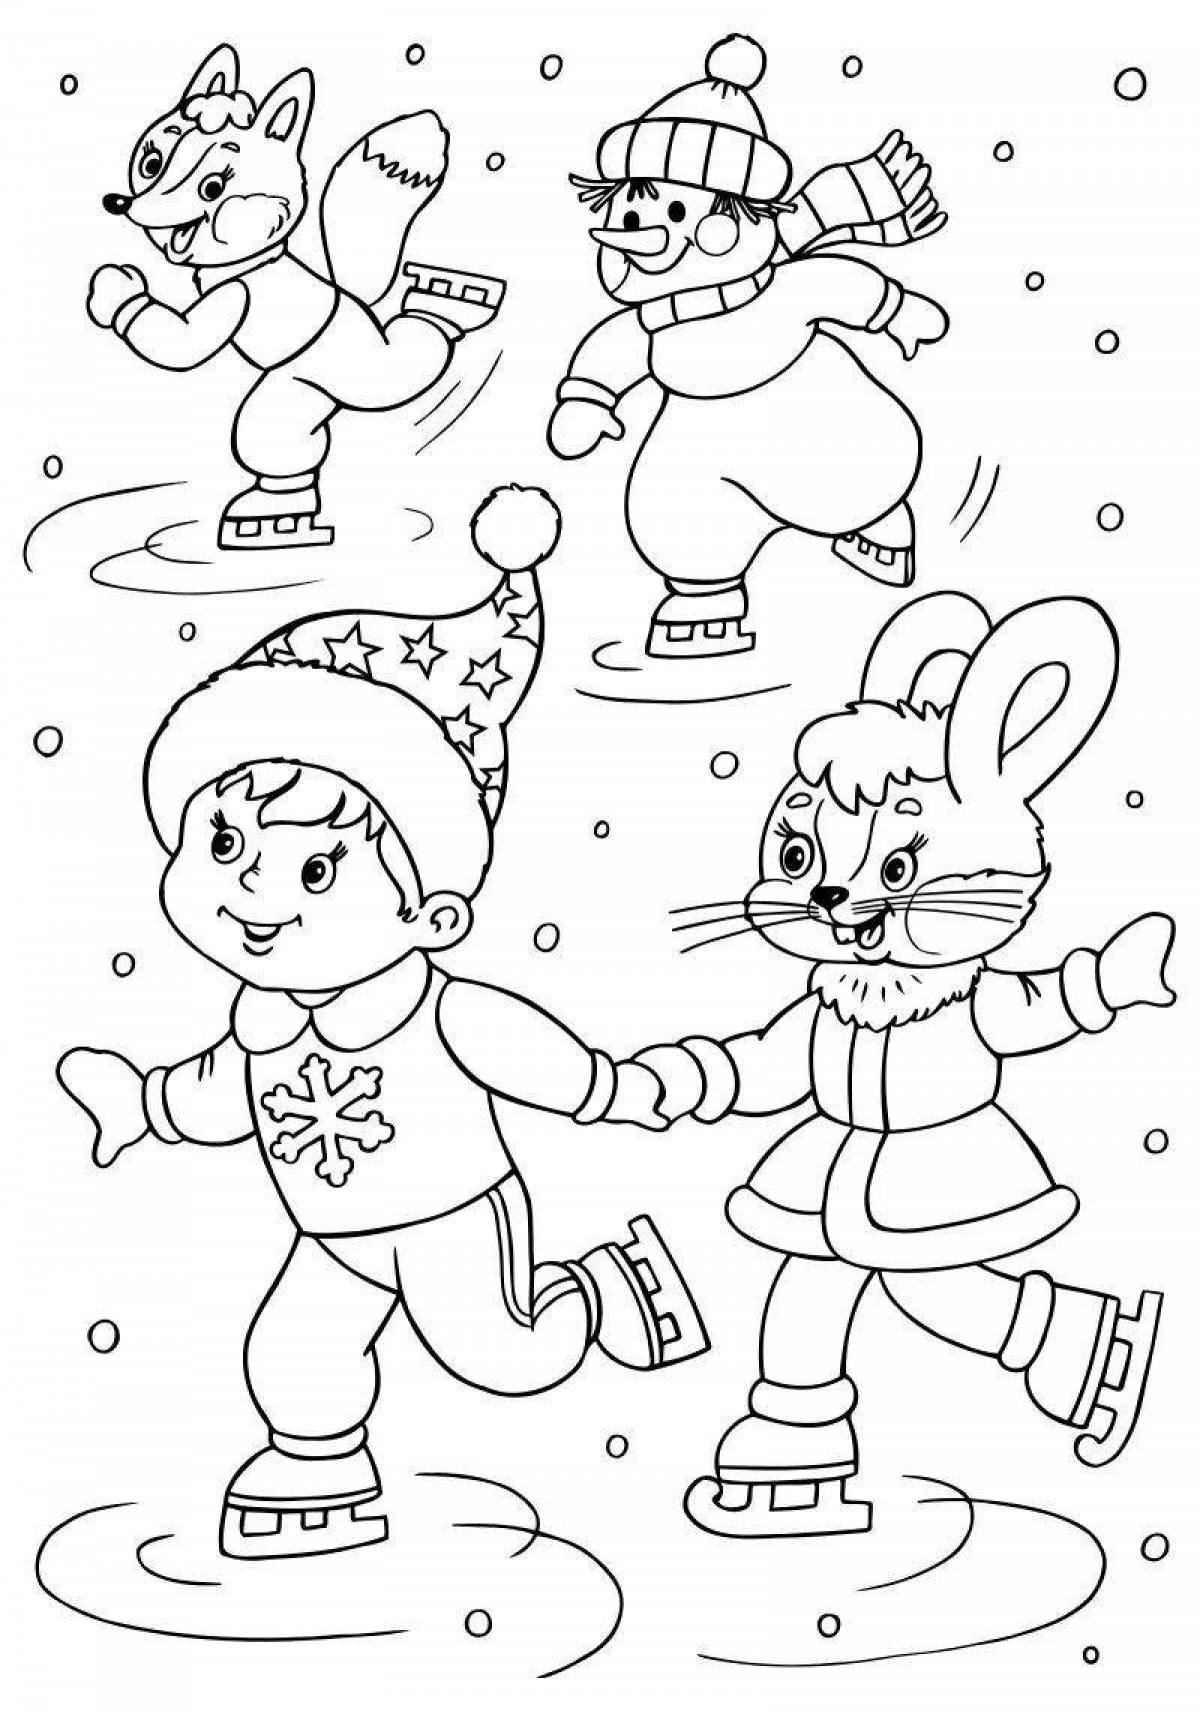 Luminous winter coloring book for children 3-4 years old